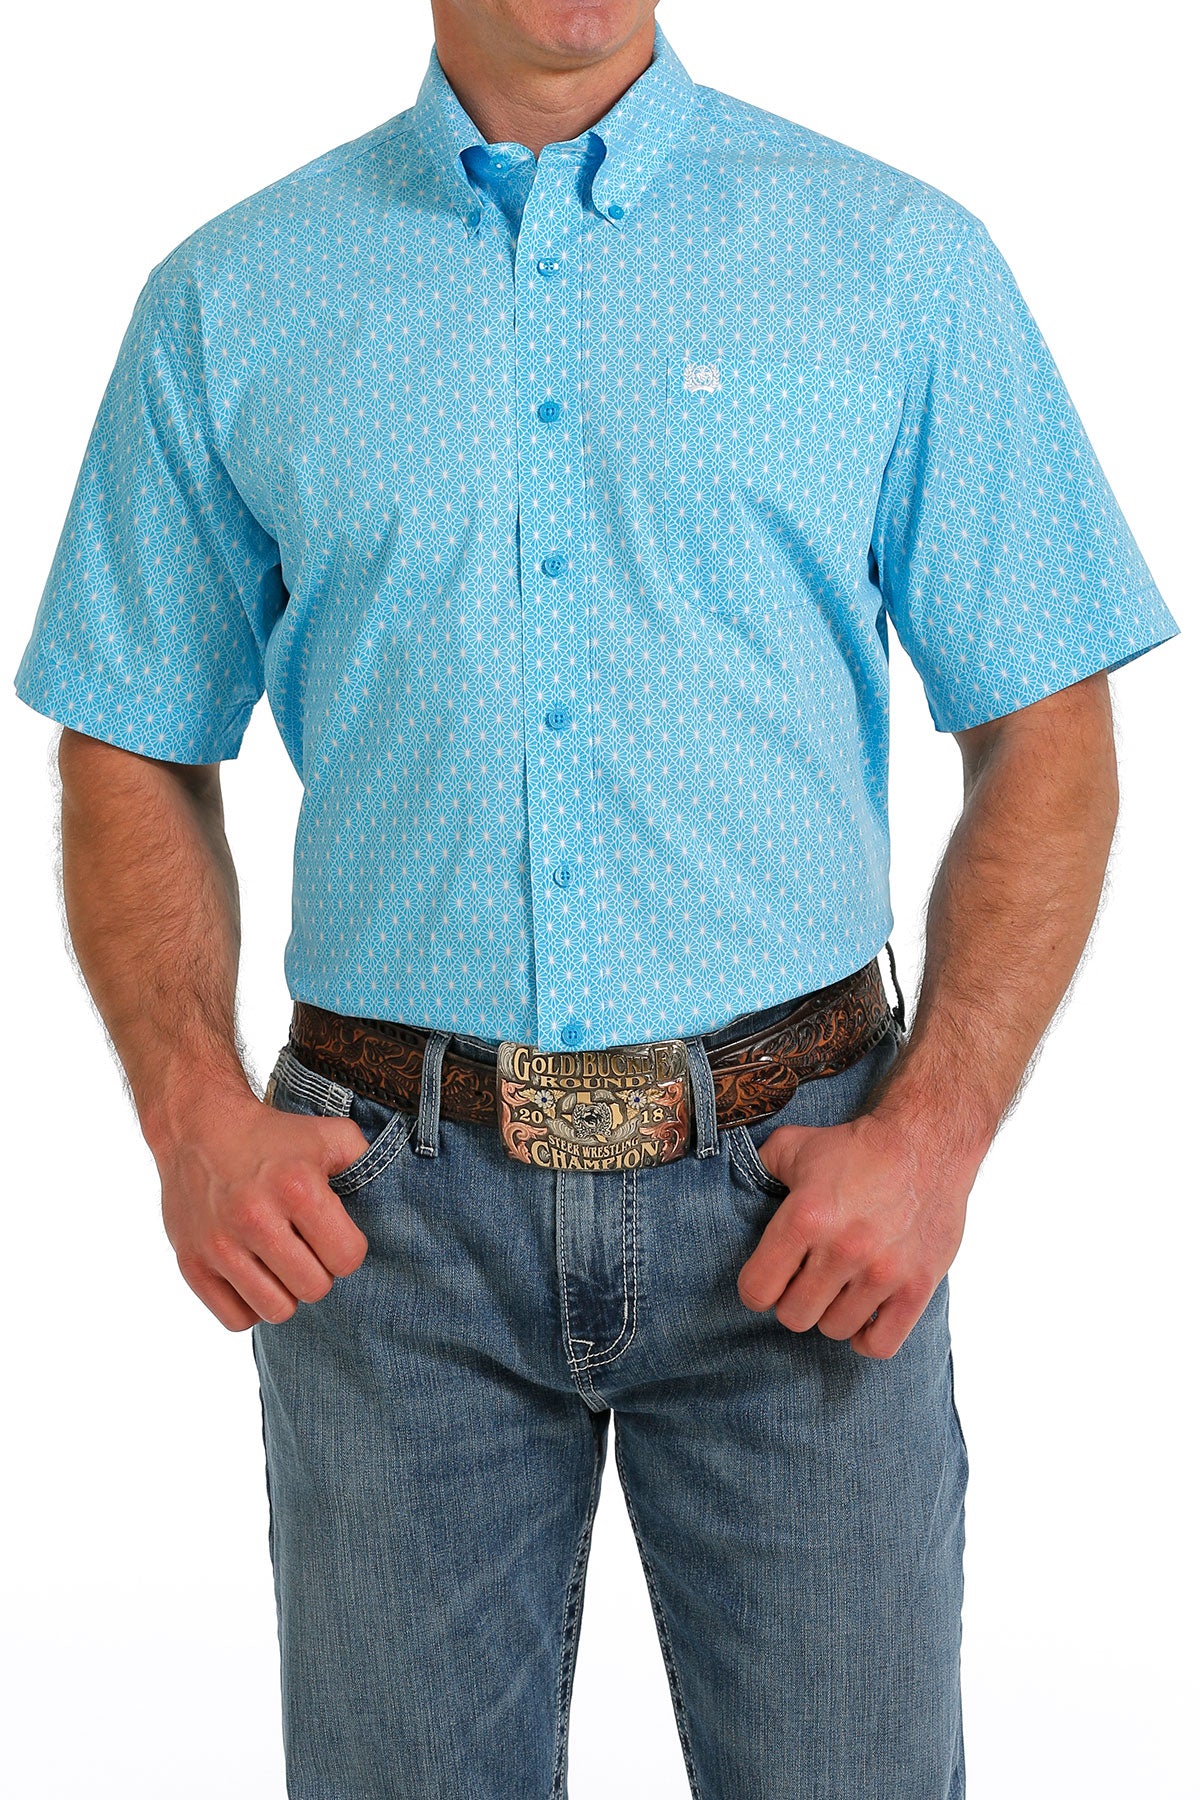 Cinch Short Sleeve Baby Blue Button Up